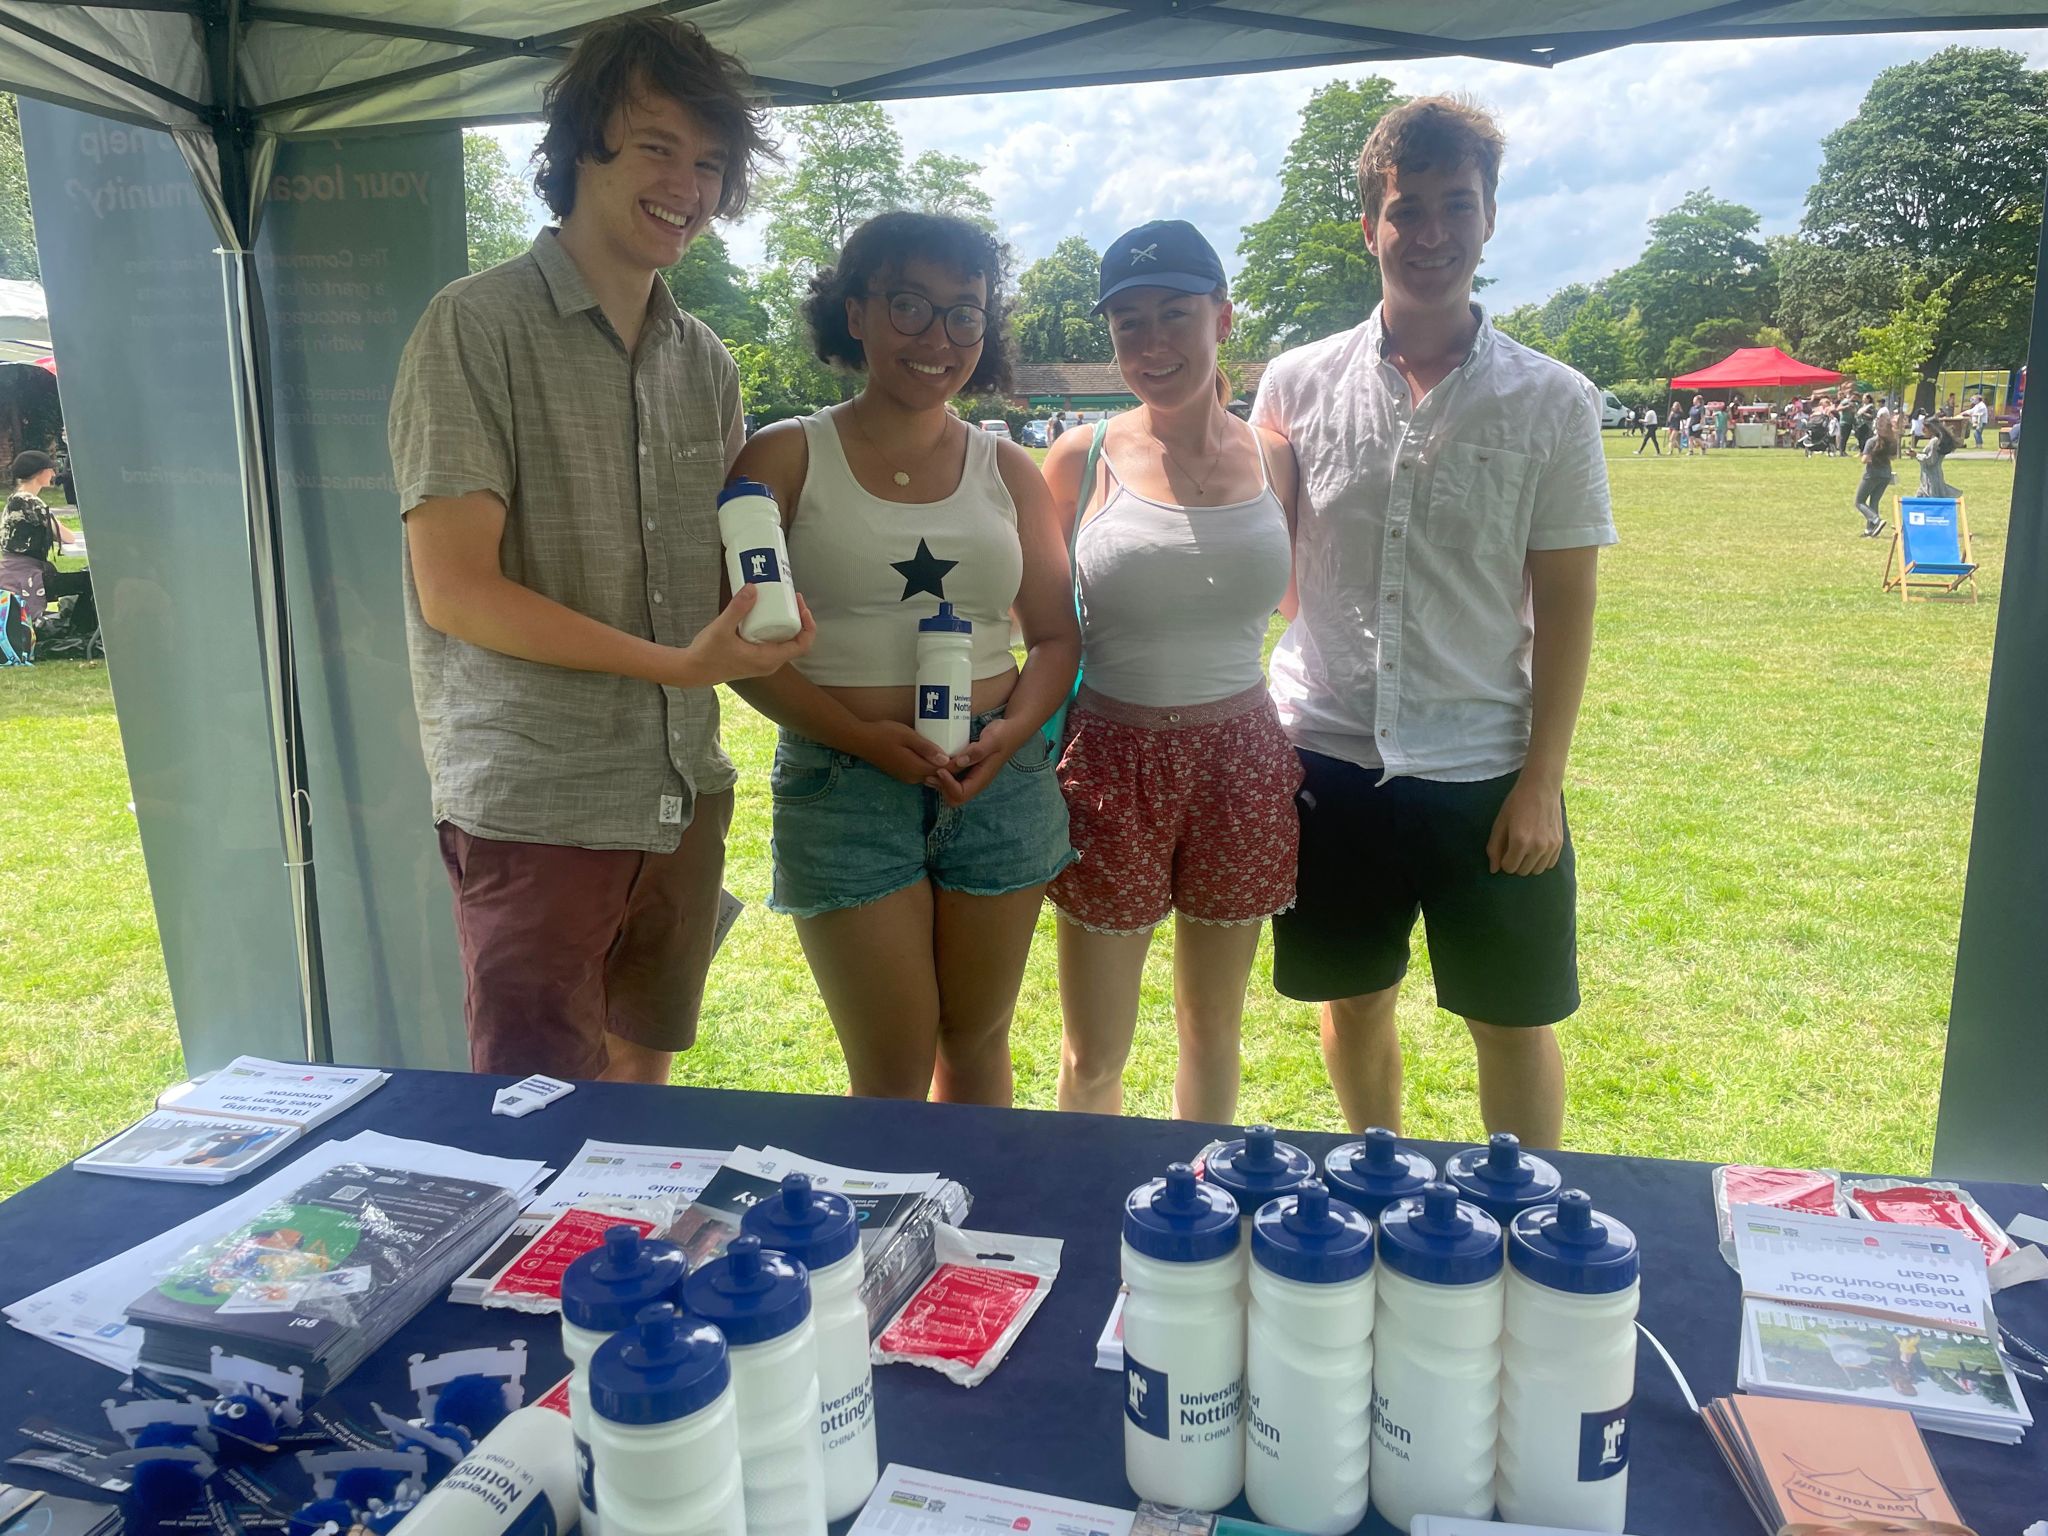 Students at the stand - Lenton Festival